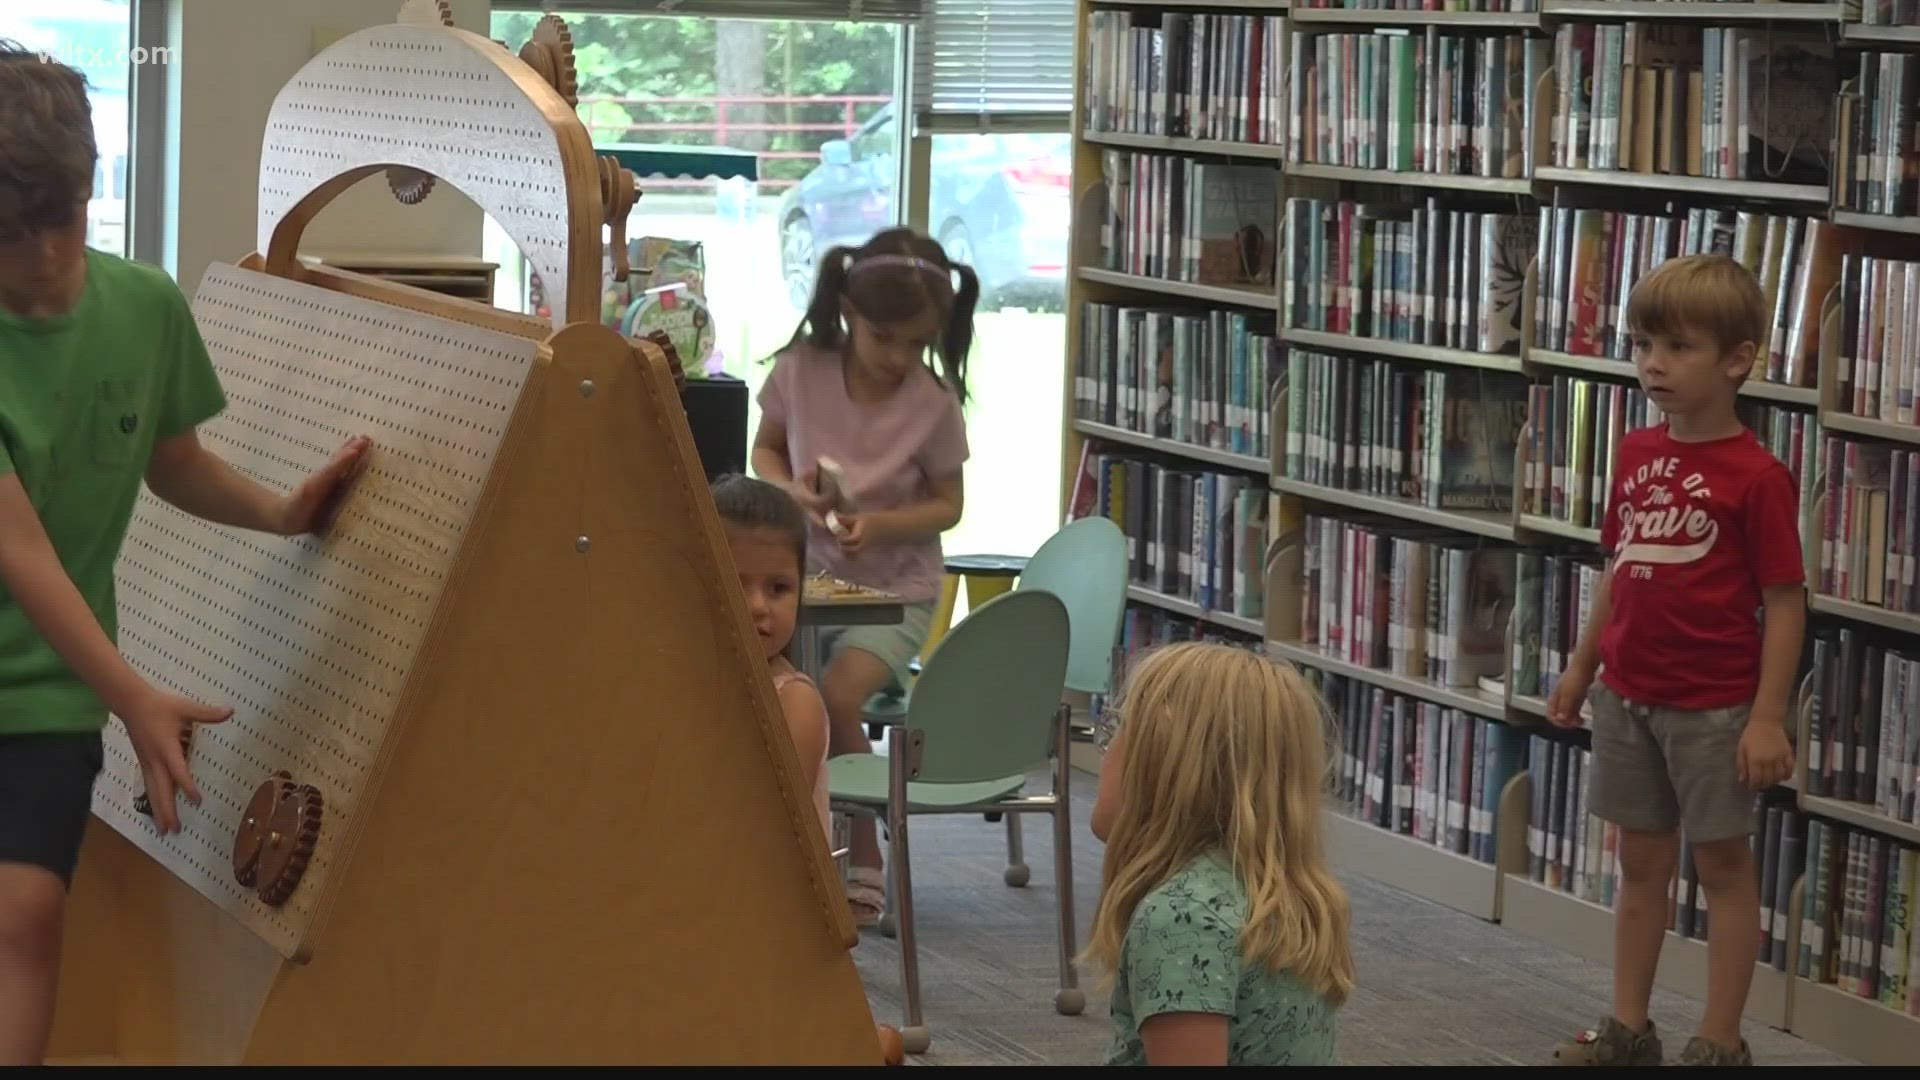 Various Lexington County Library branches are offering free reading programs, garden programs and outdoor activities for kids this summer.